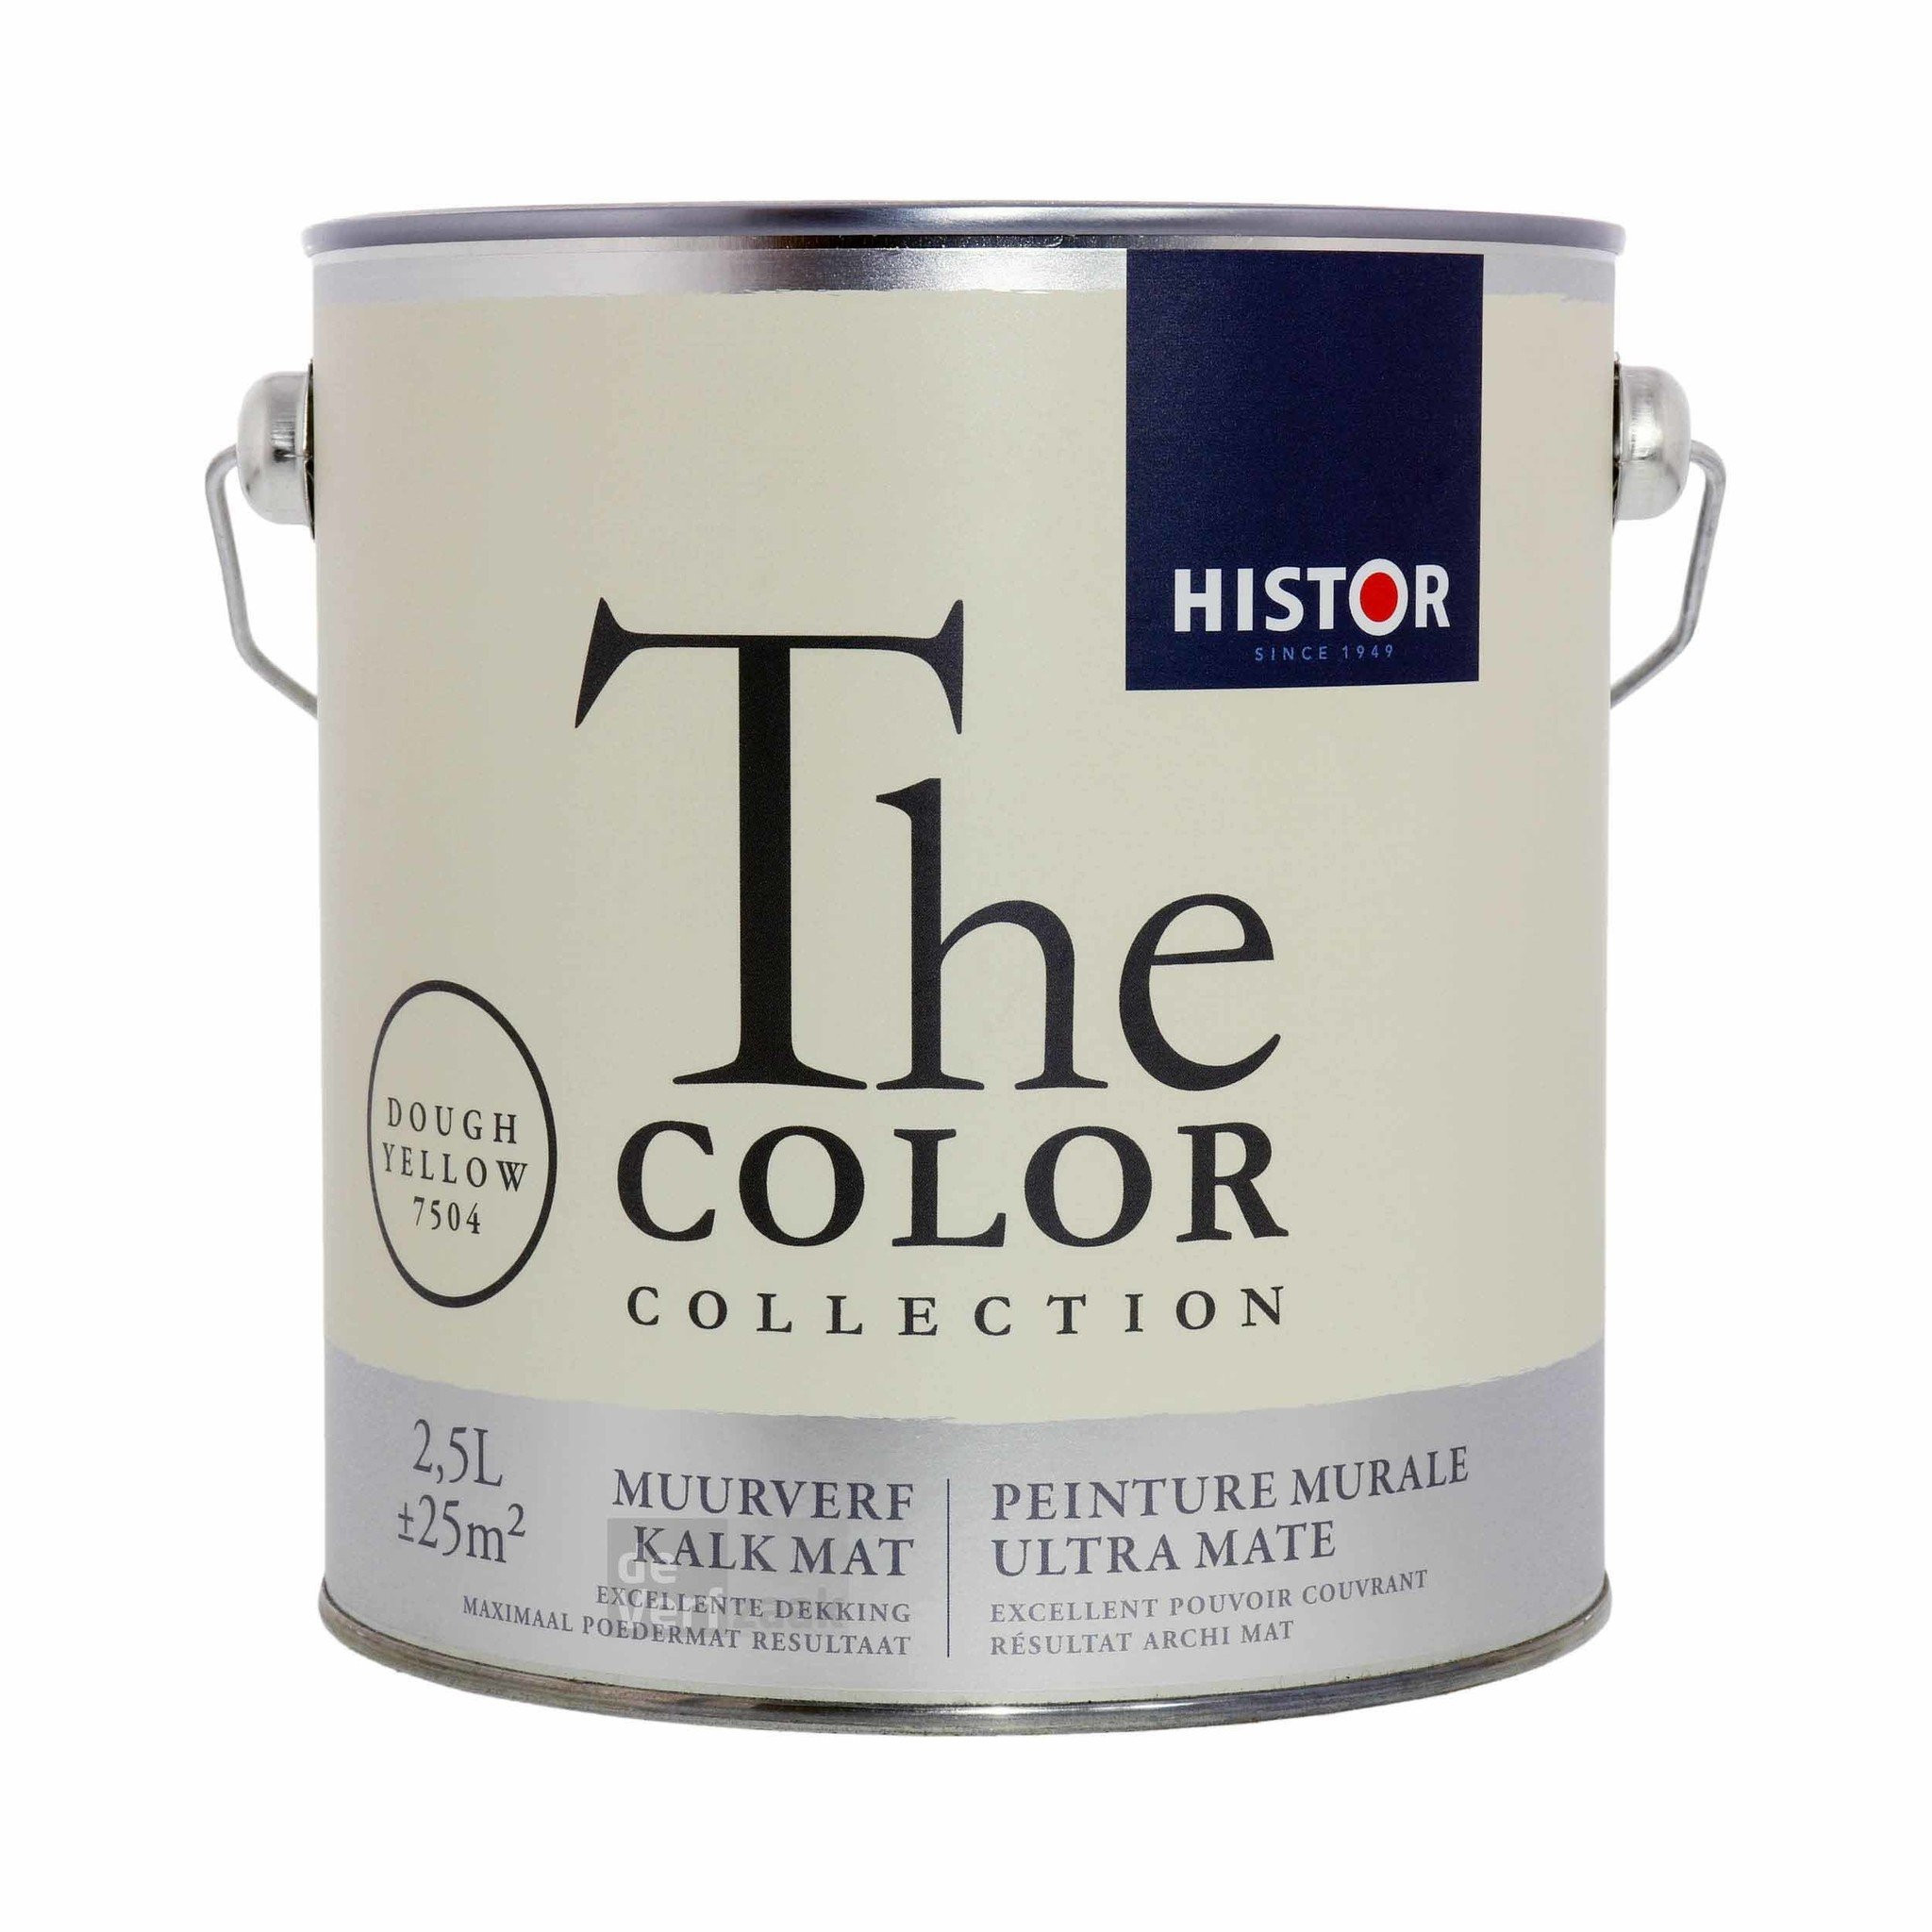 Histor The Color Collection Muurverf Kalkmat - Dough Yellow - 2,5 liter